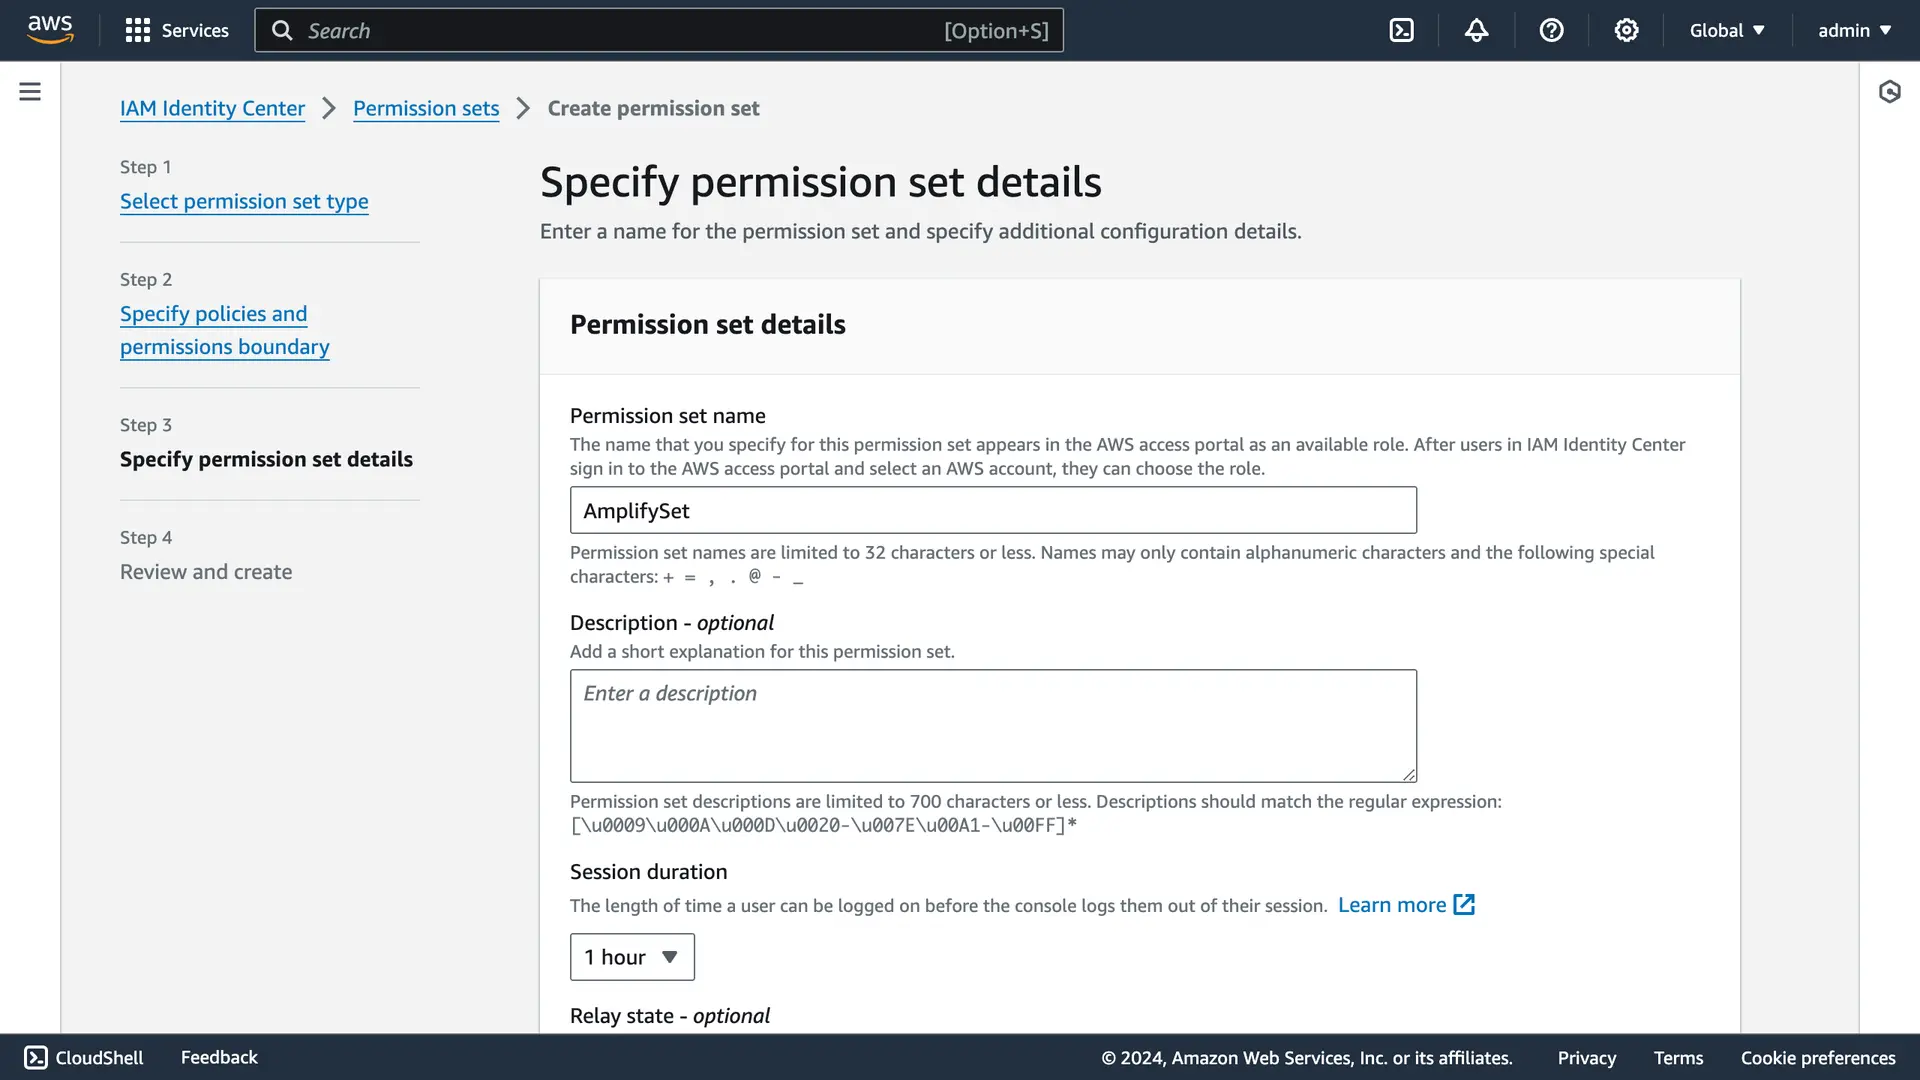 AWS IAM Identity Center custom permission set details page with the name "AmplifySet".